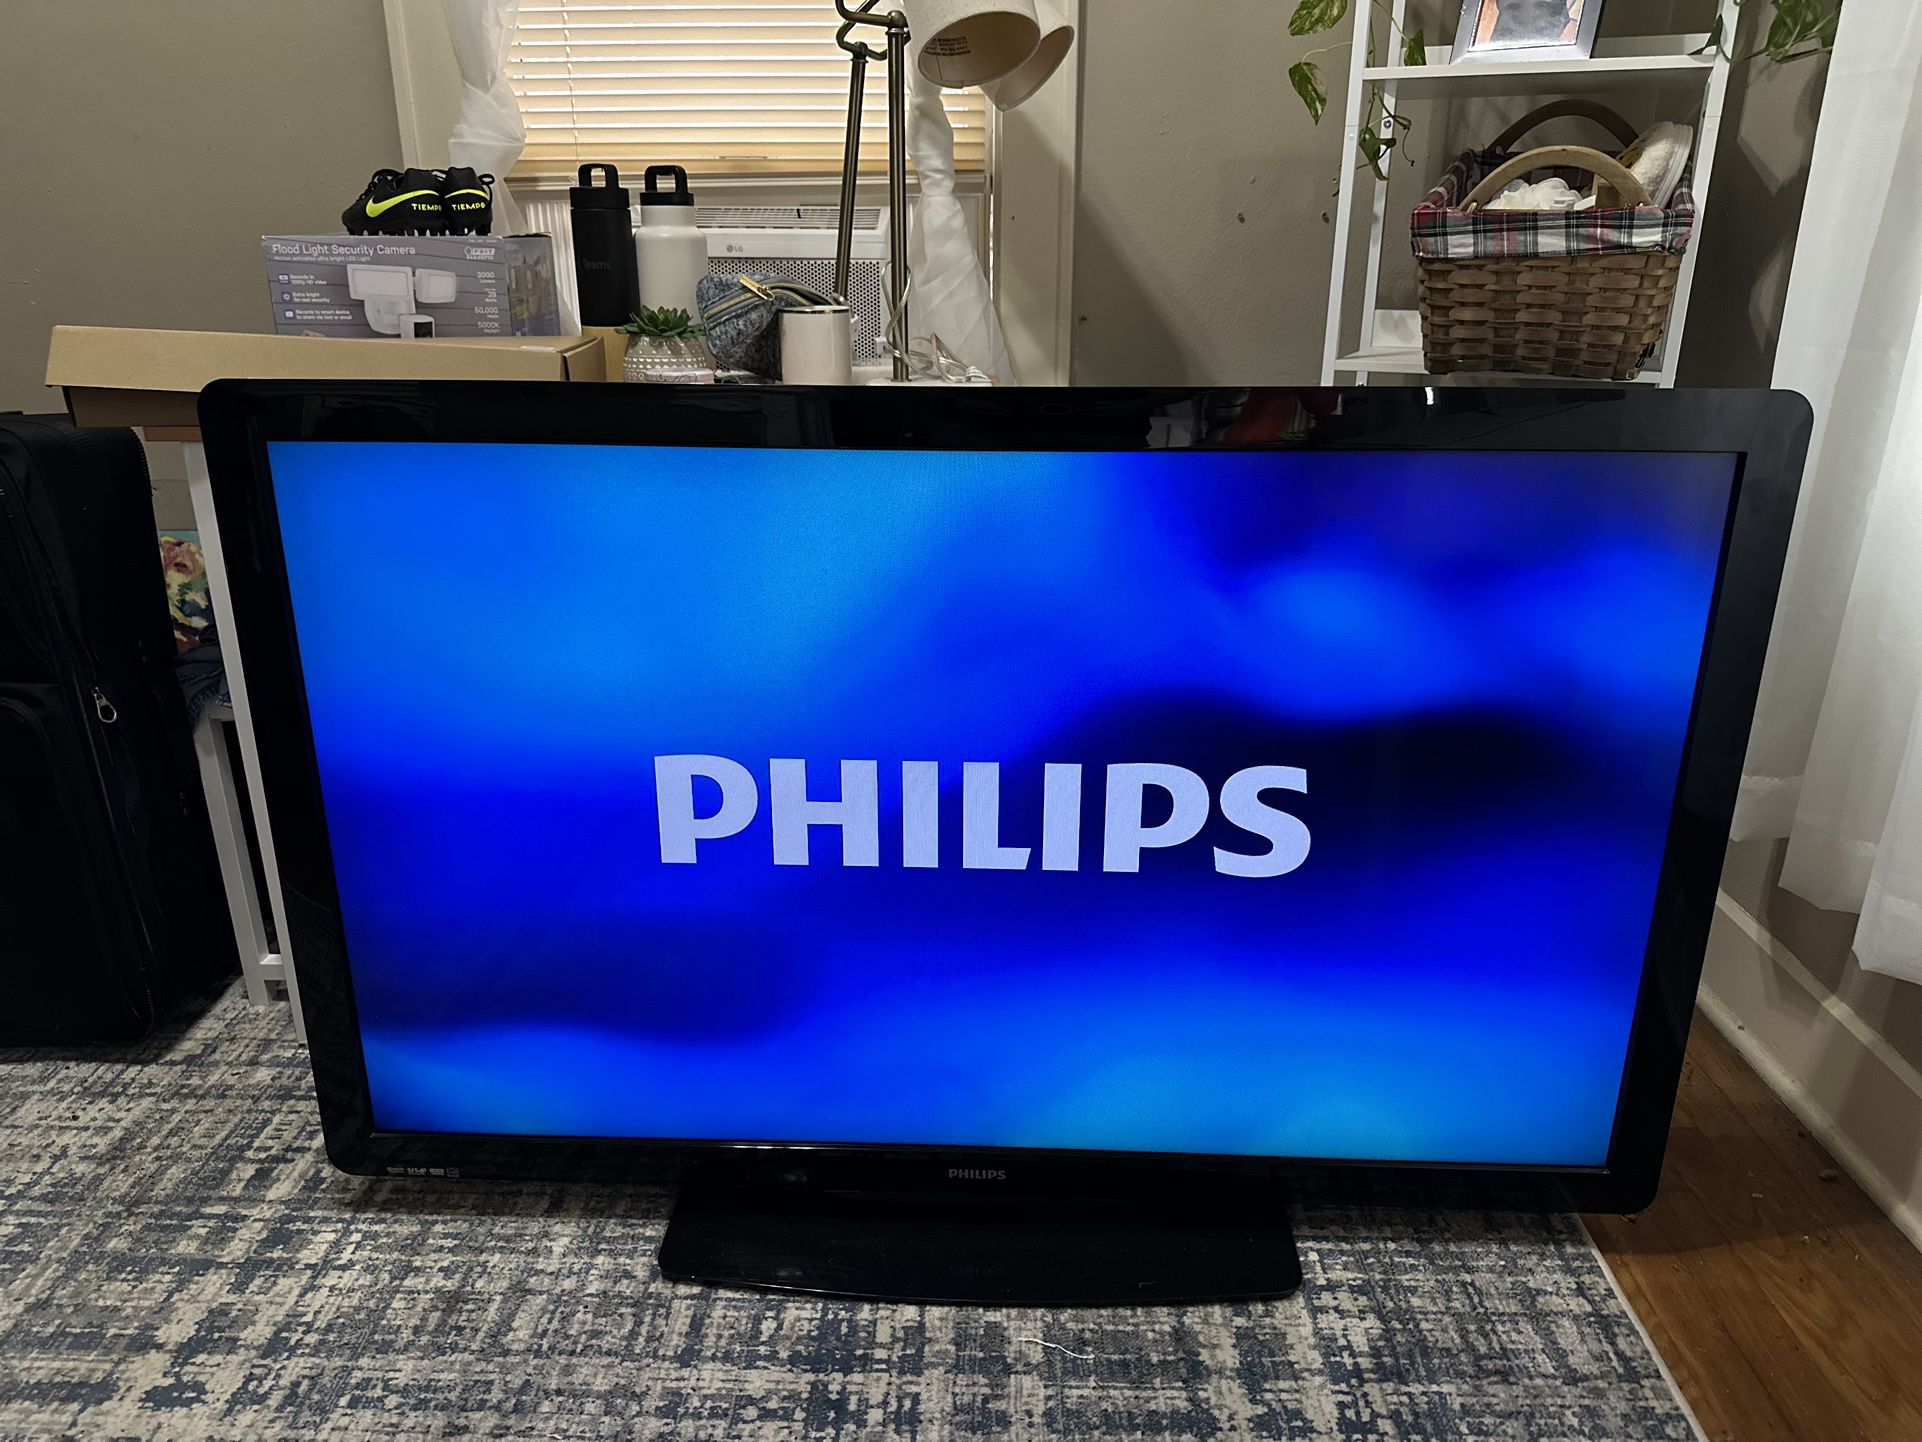 Phillips Tv 55 Inch Works Well